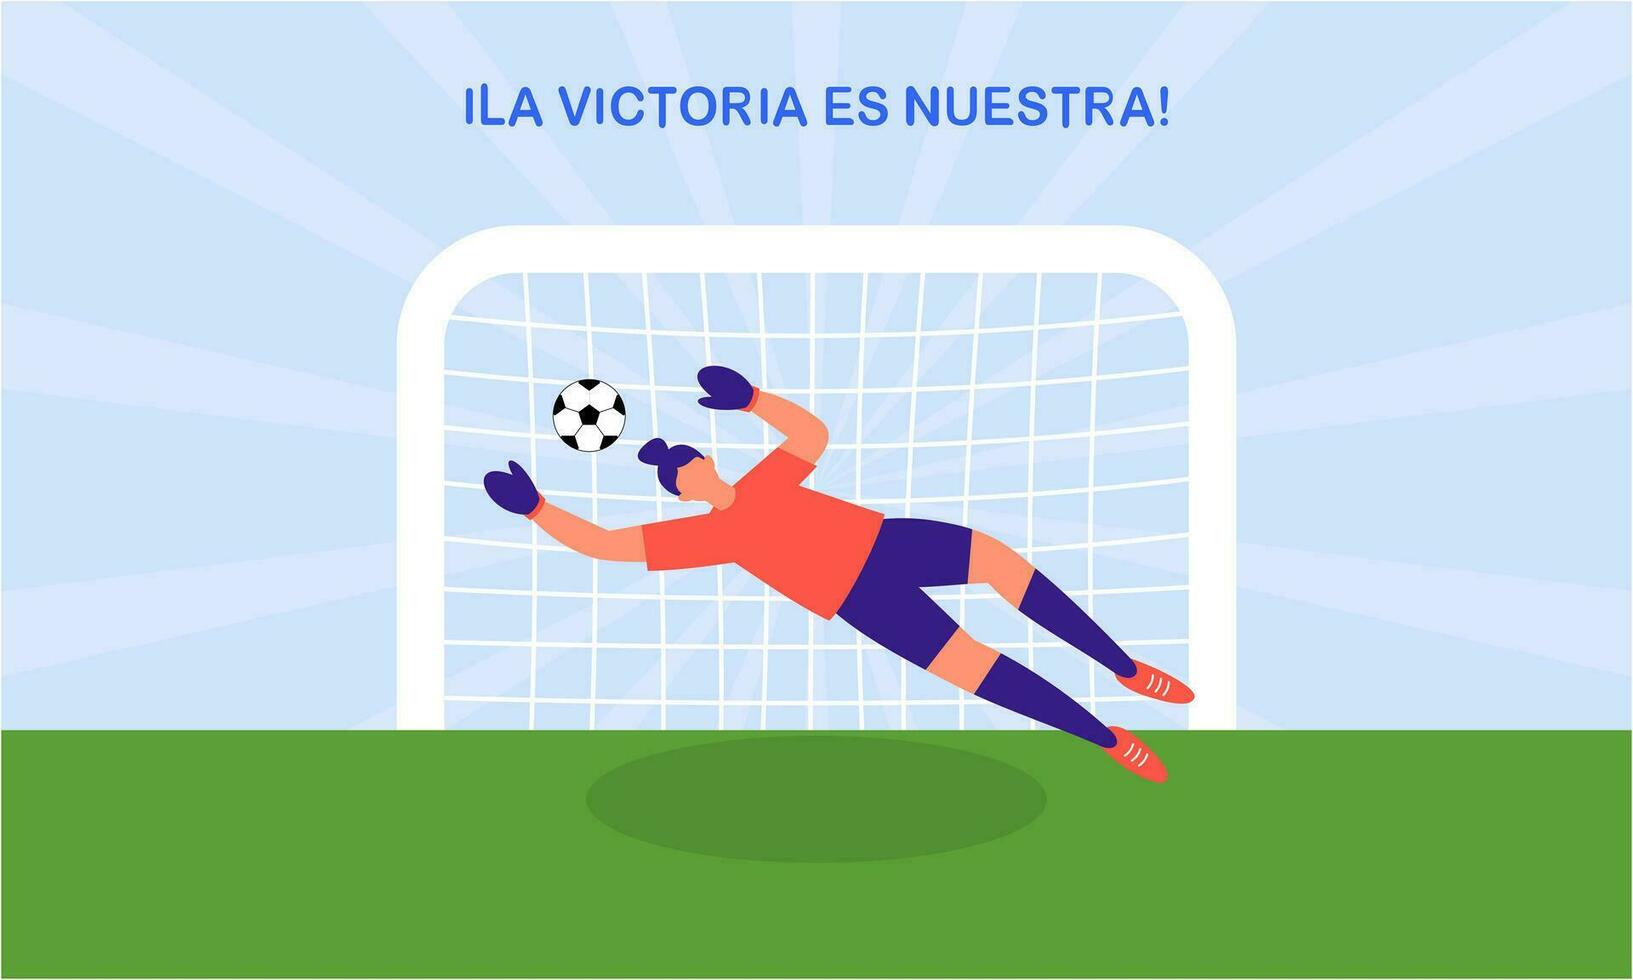 Spanish football players celebrating their victory at the world cup illustration vector